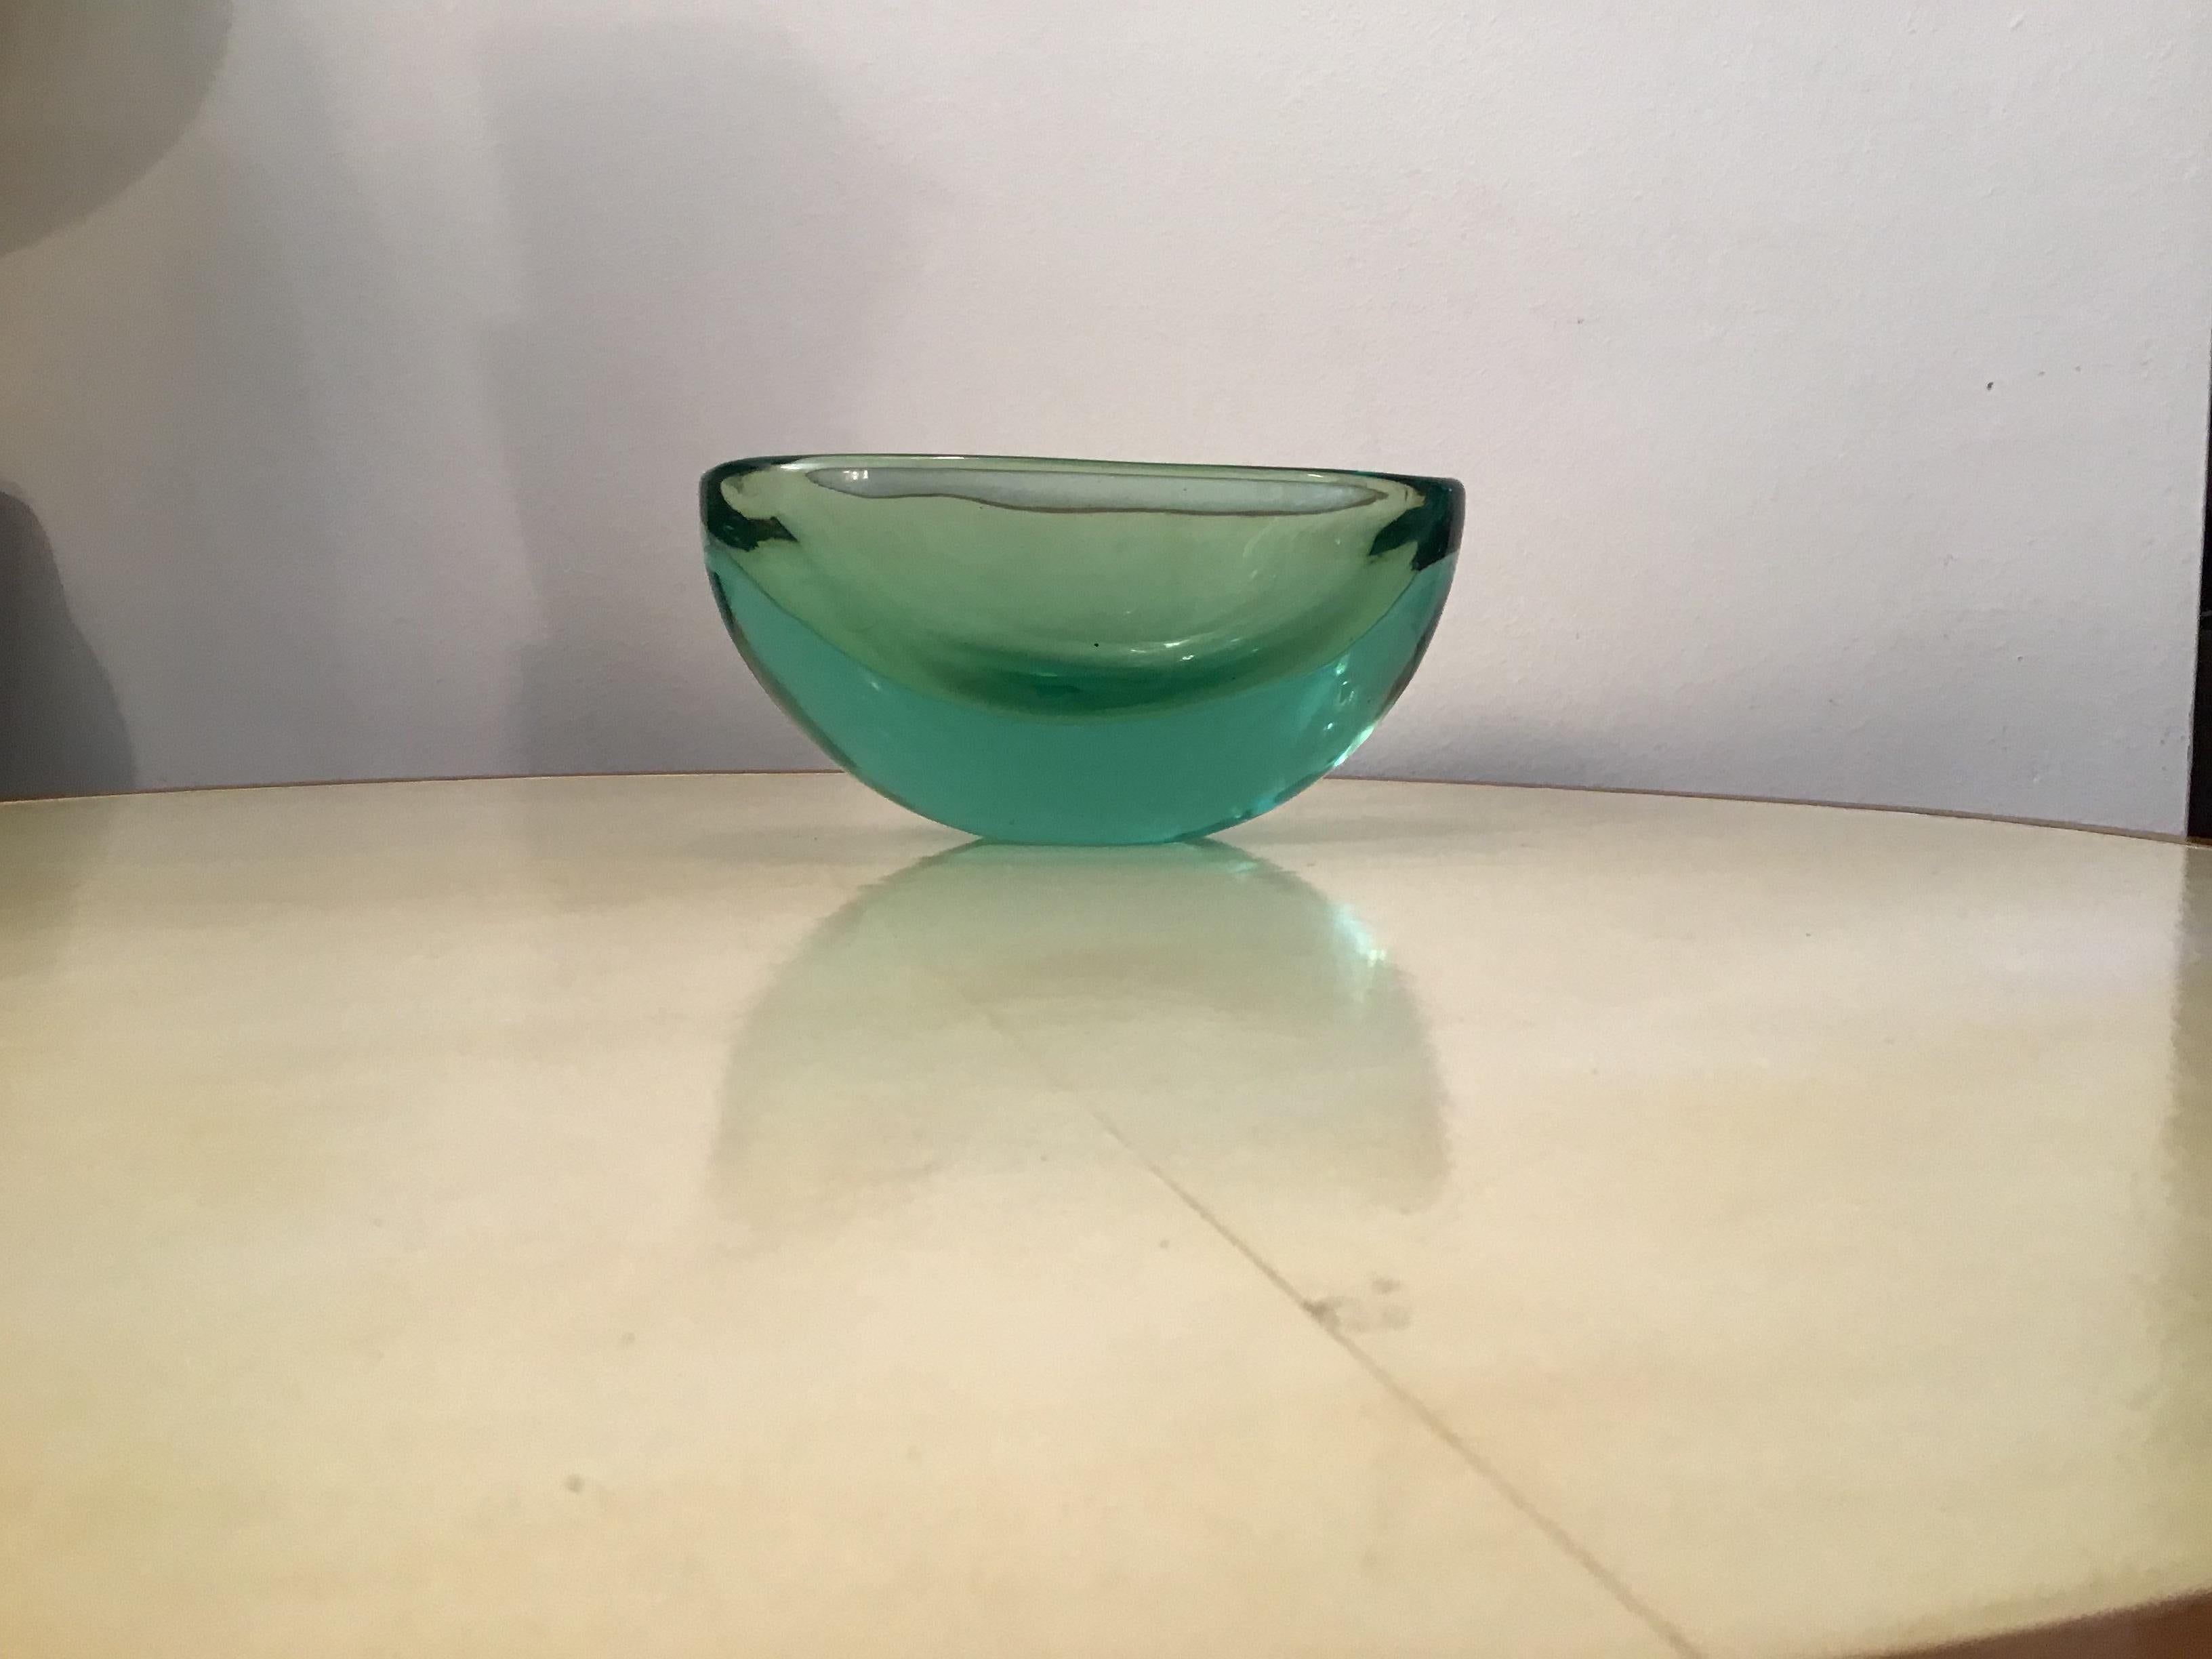 Archimede Seguso Oval Bowl, Green Submerged Glass Centrepiece, 1950 For Sale 5